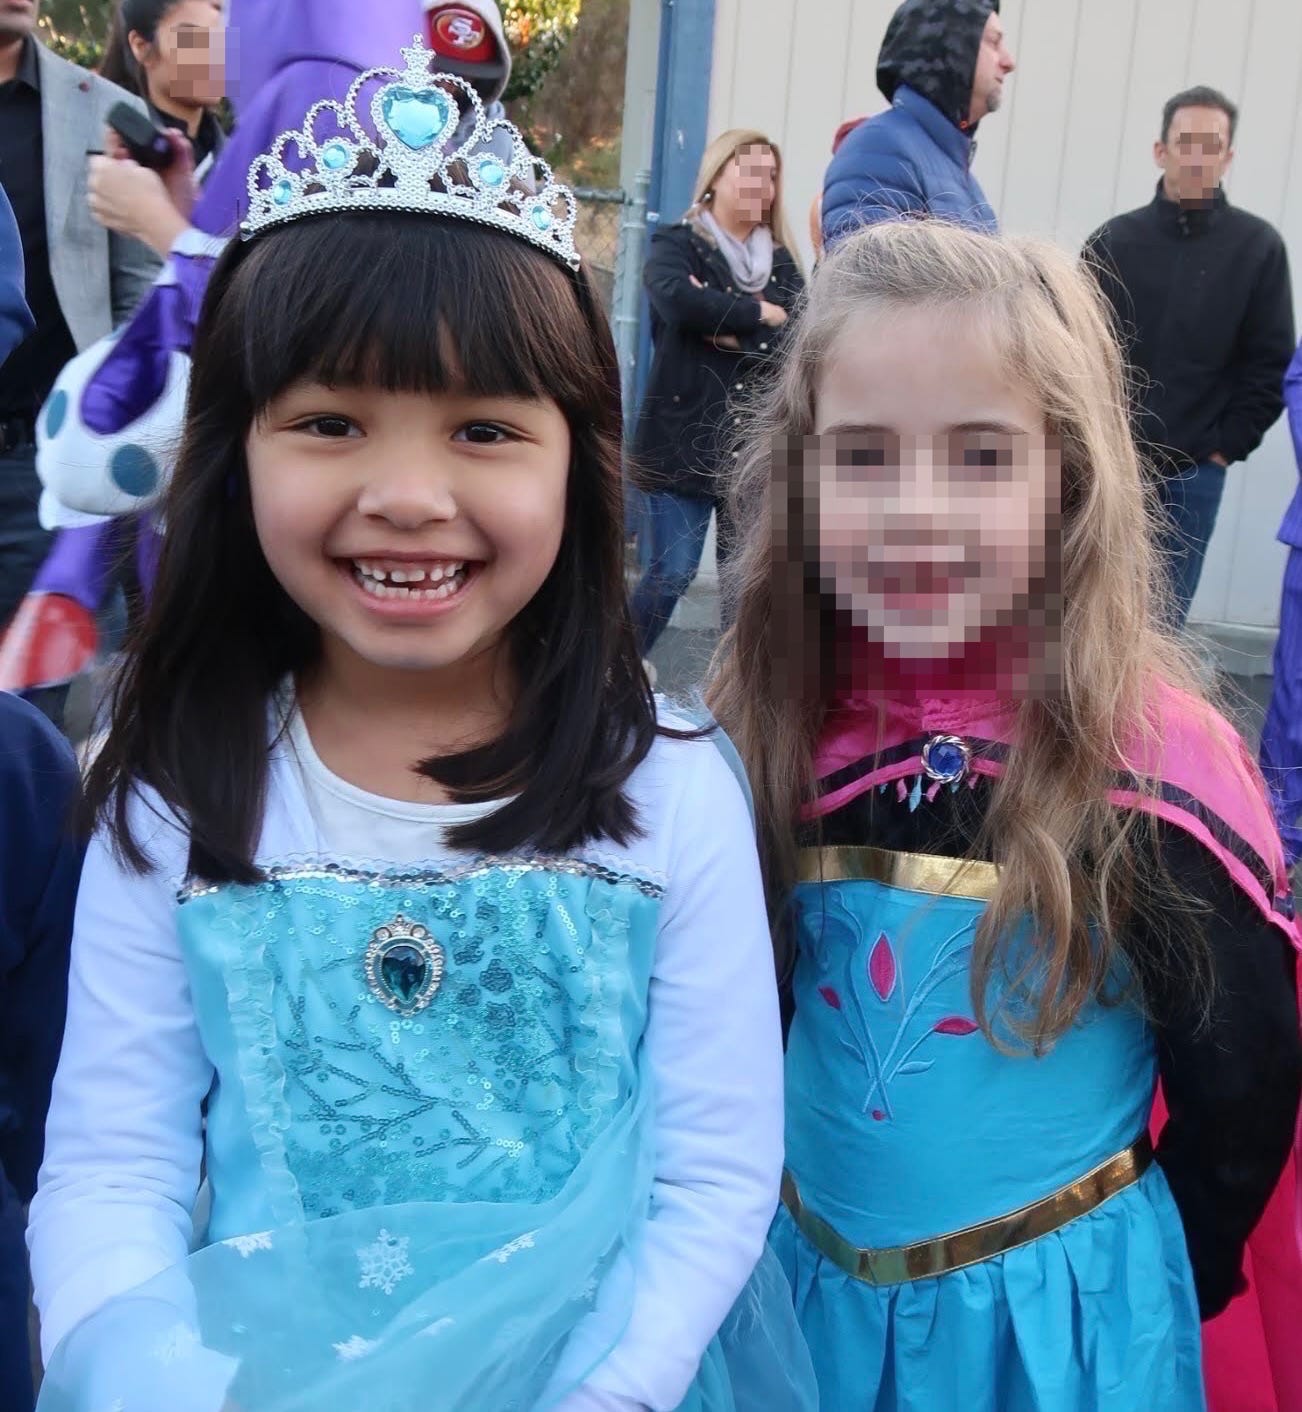 Two girls dressed up as Elsa and Anna from the movie Frozen